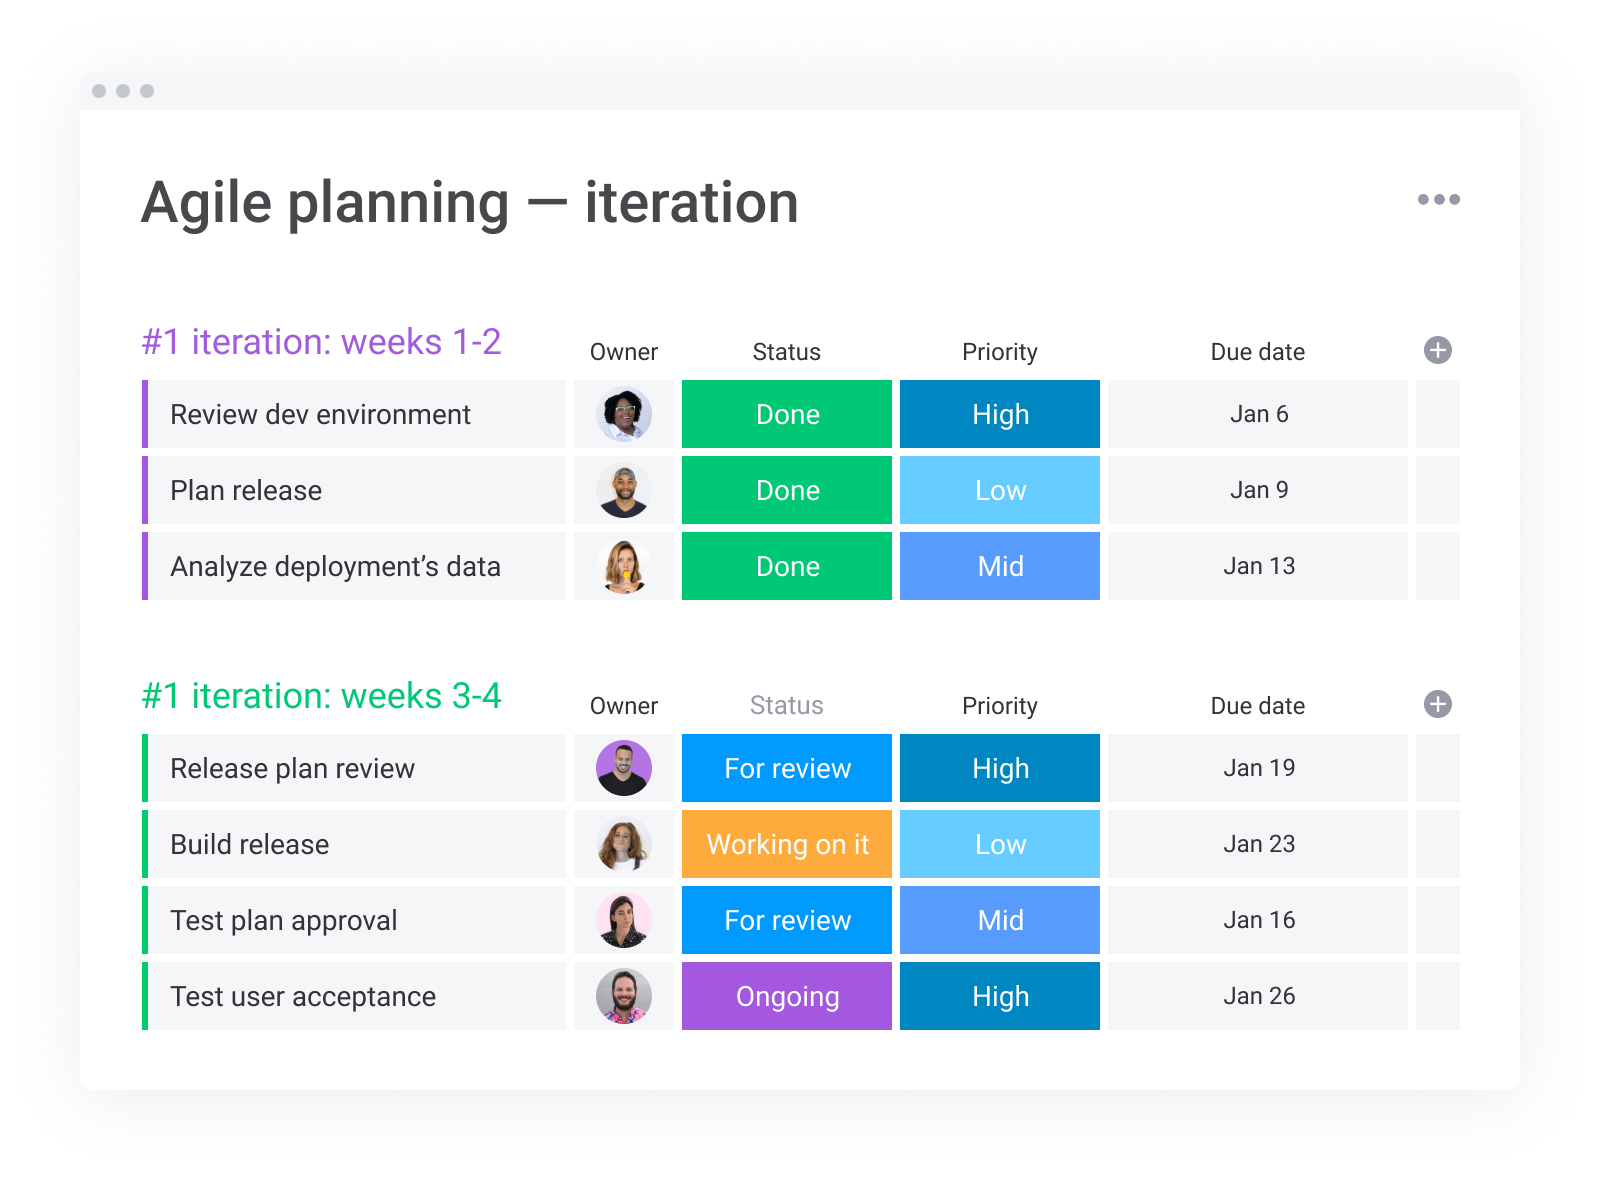 A screenshot of staging-mondaycomblog.kinsta.cloud's agile iteration planning template used in Agile project management.